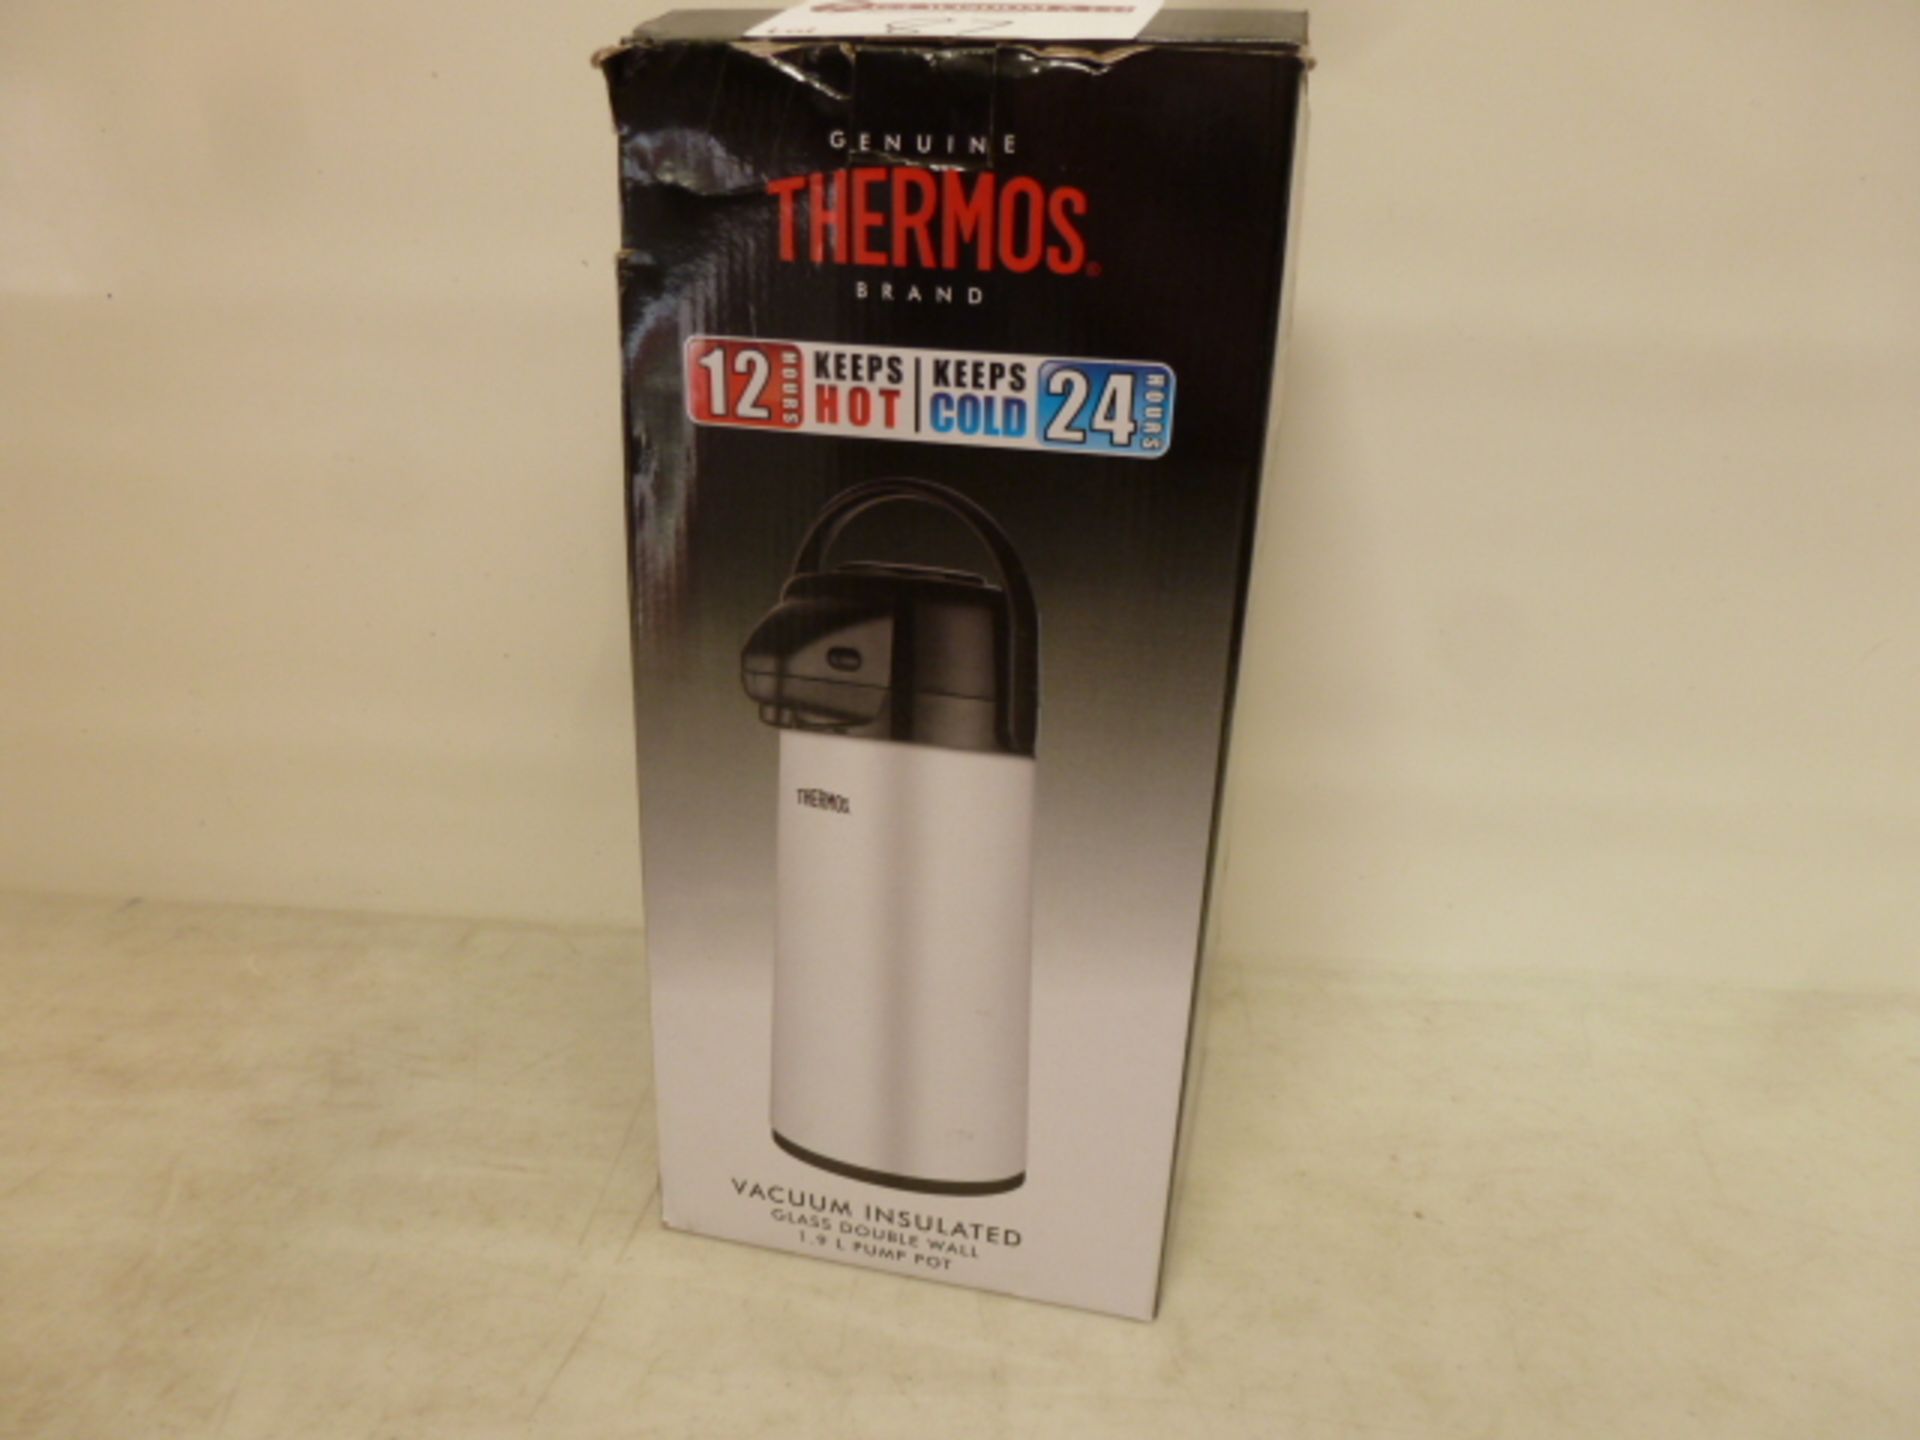 Thermos Vacuum Insulated Glass Double Wall 1.9Litre Pump Pot, with Original Box